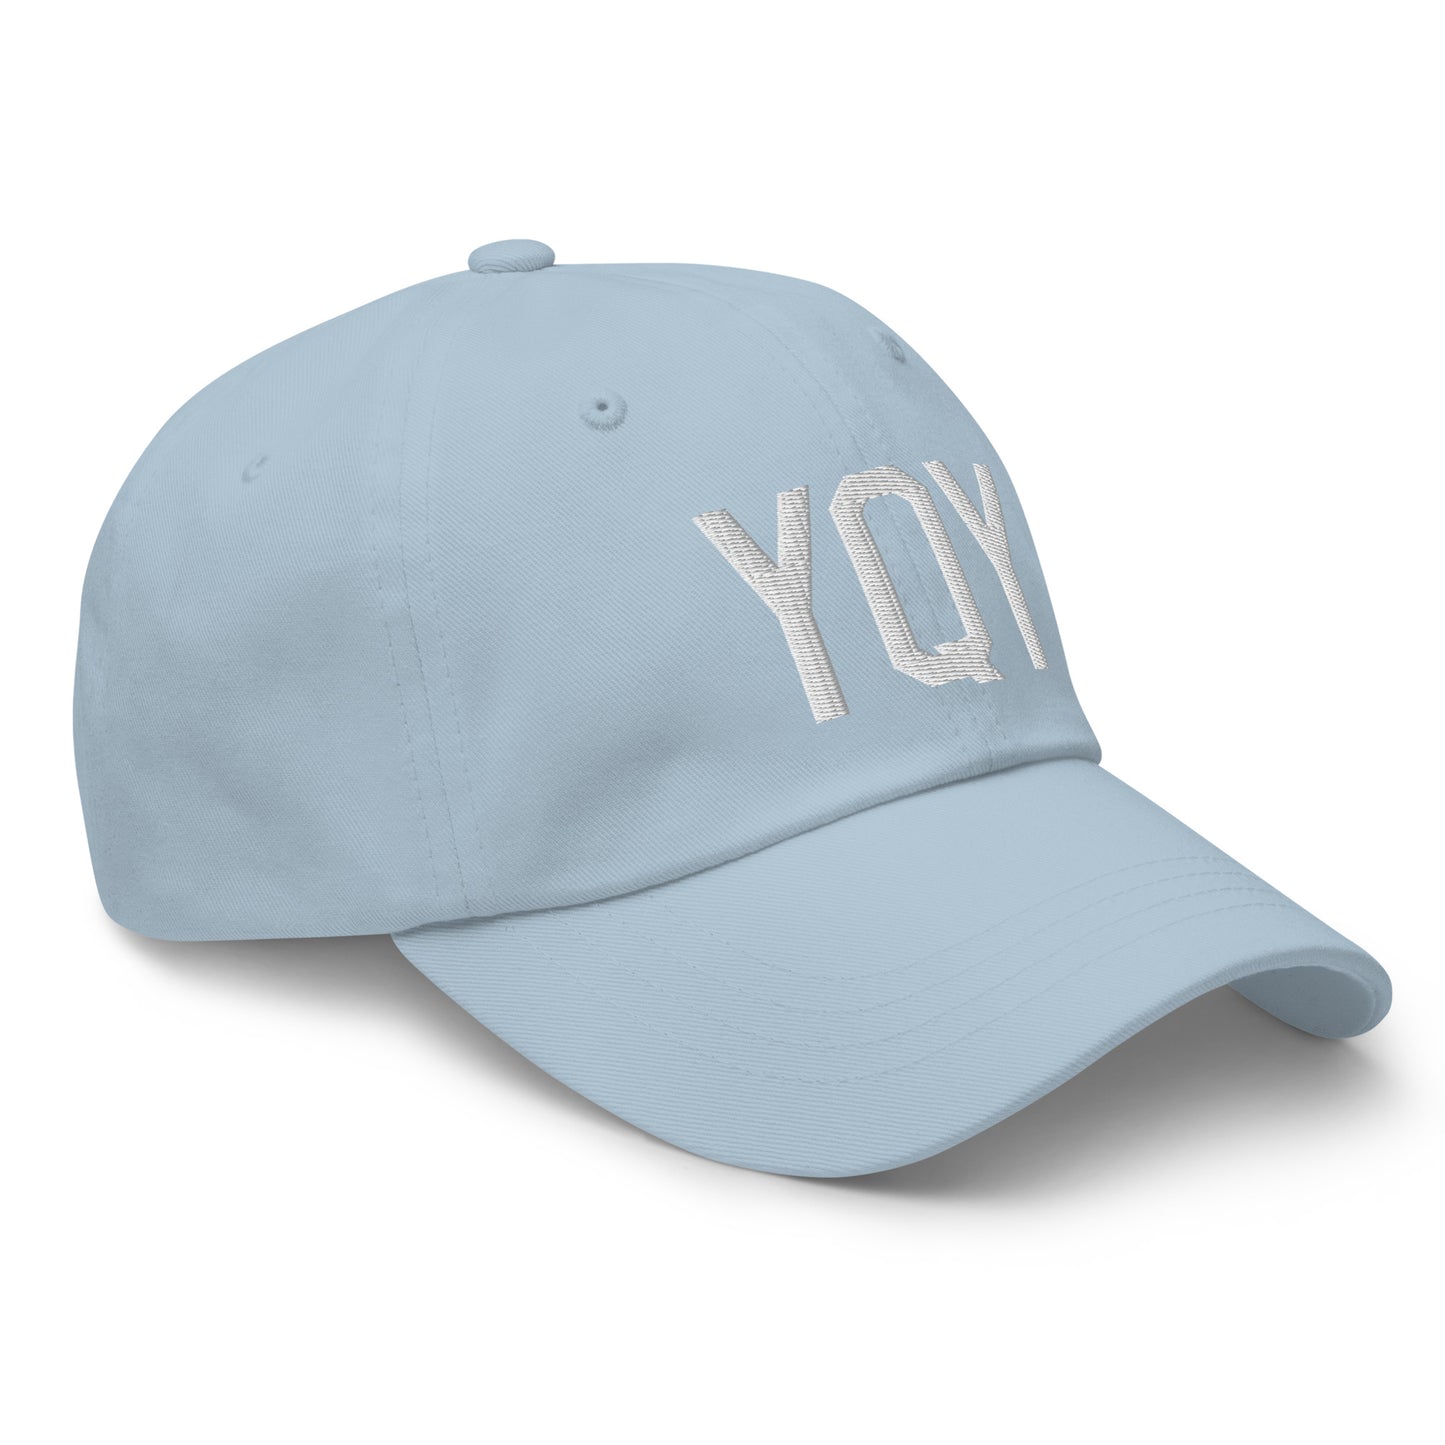 Airport Code Baseball Cap - White • YQY Sydney • YHM Designs - Image 29